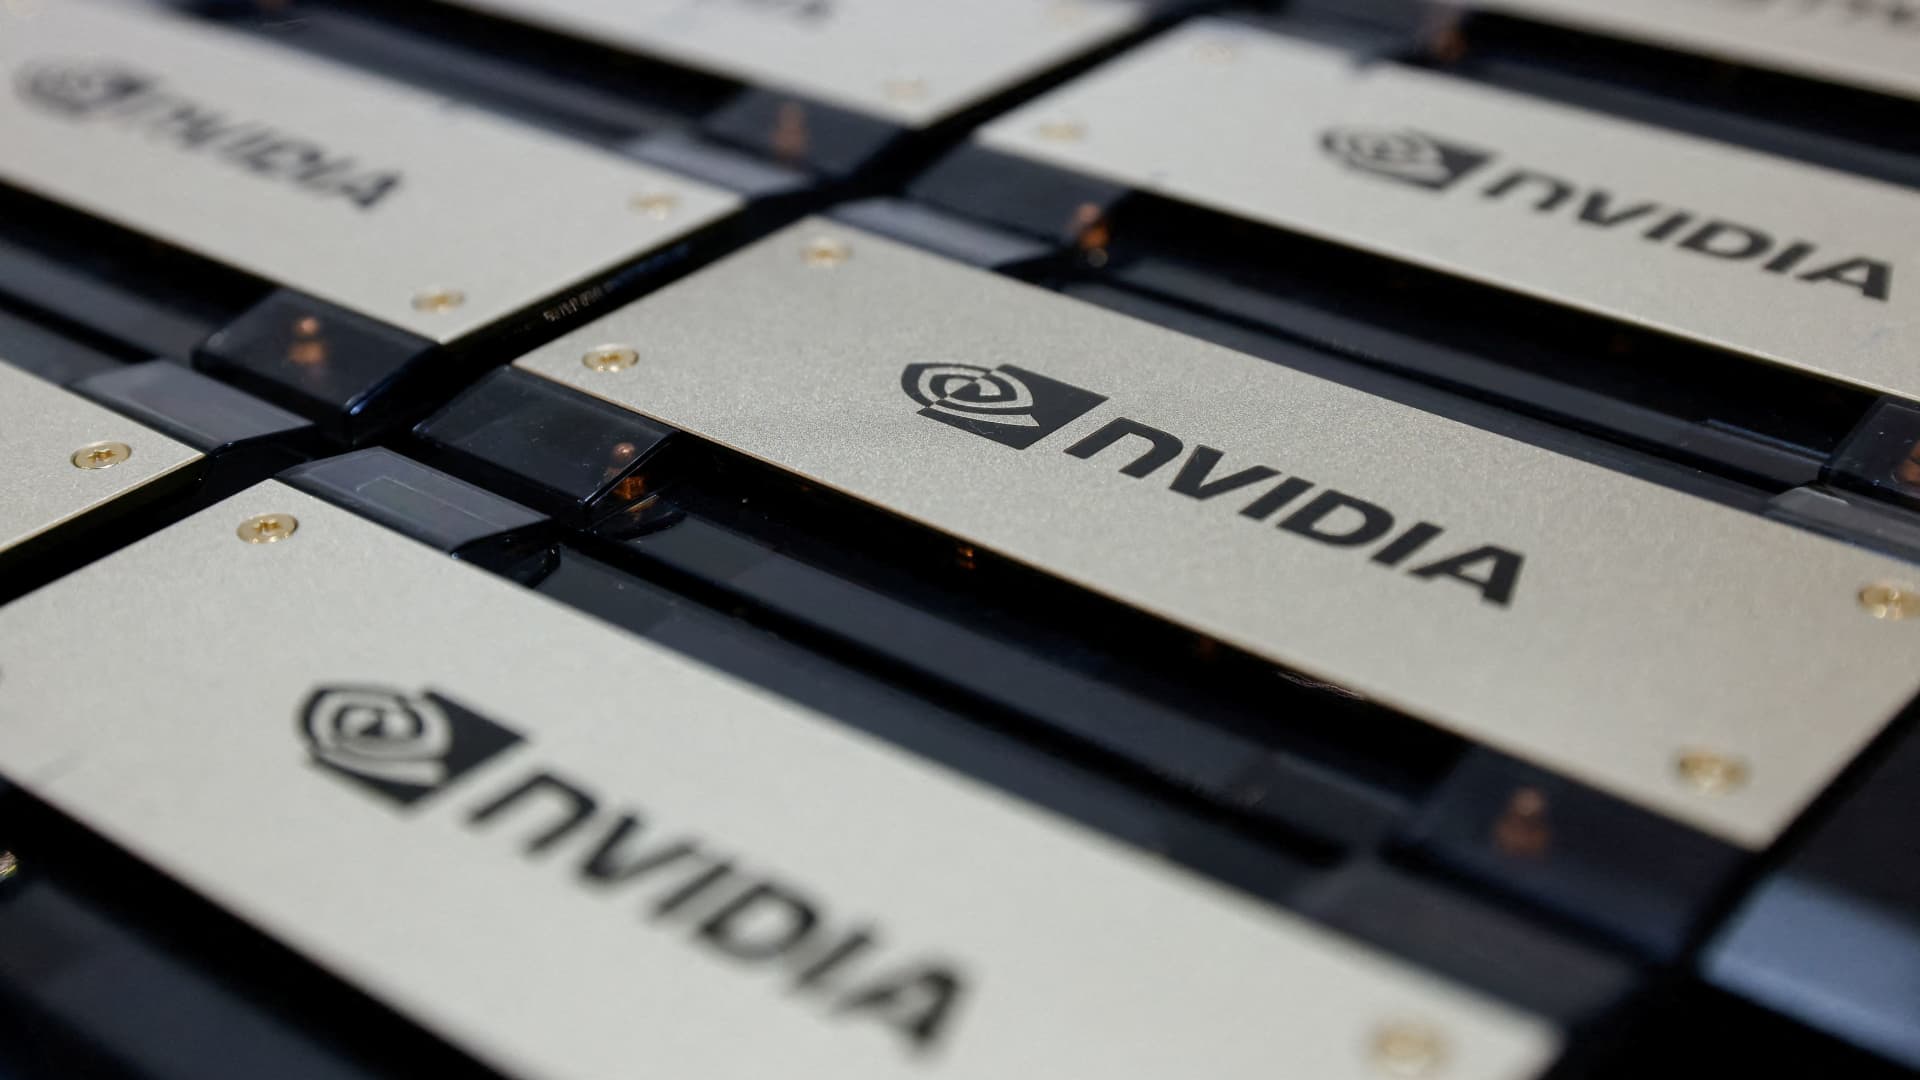 Here are Thursday’s biggest analyst calls: Nvidia, Rivian, Sunrun, DoorDash and more